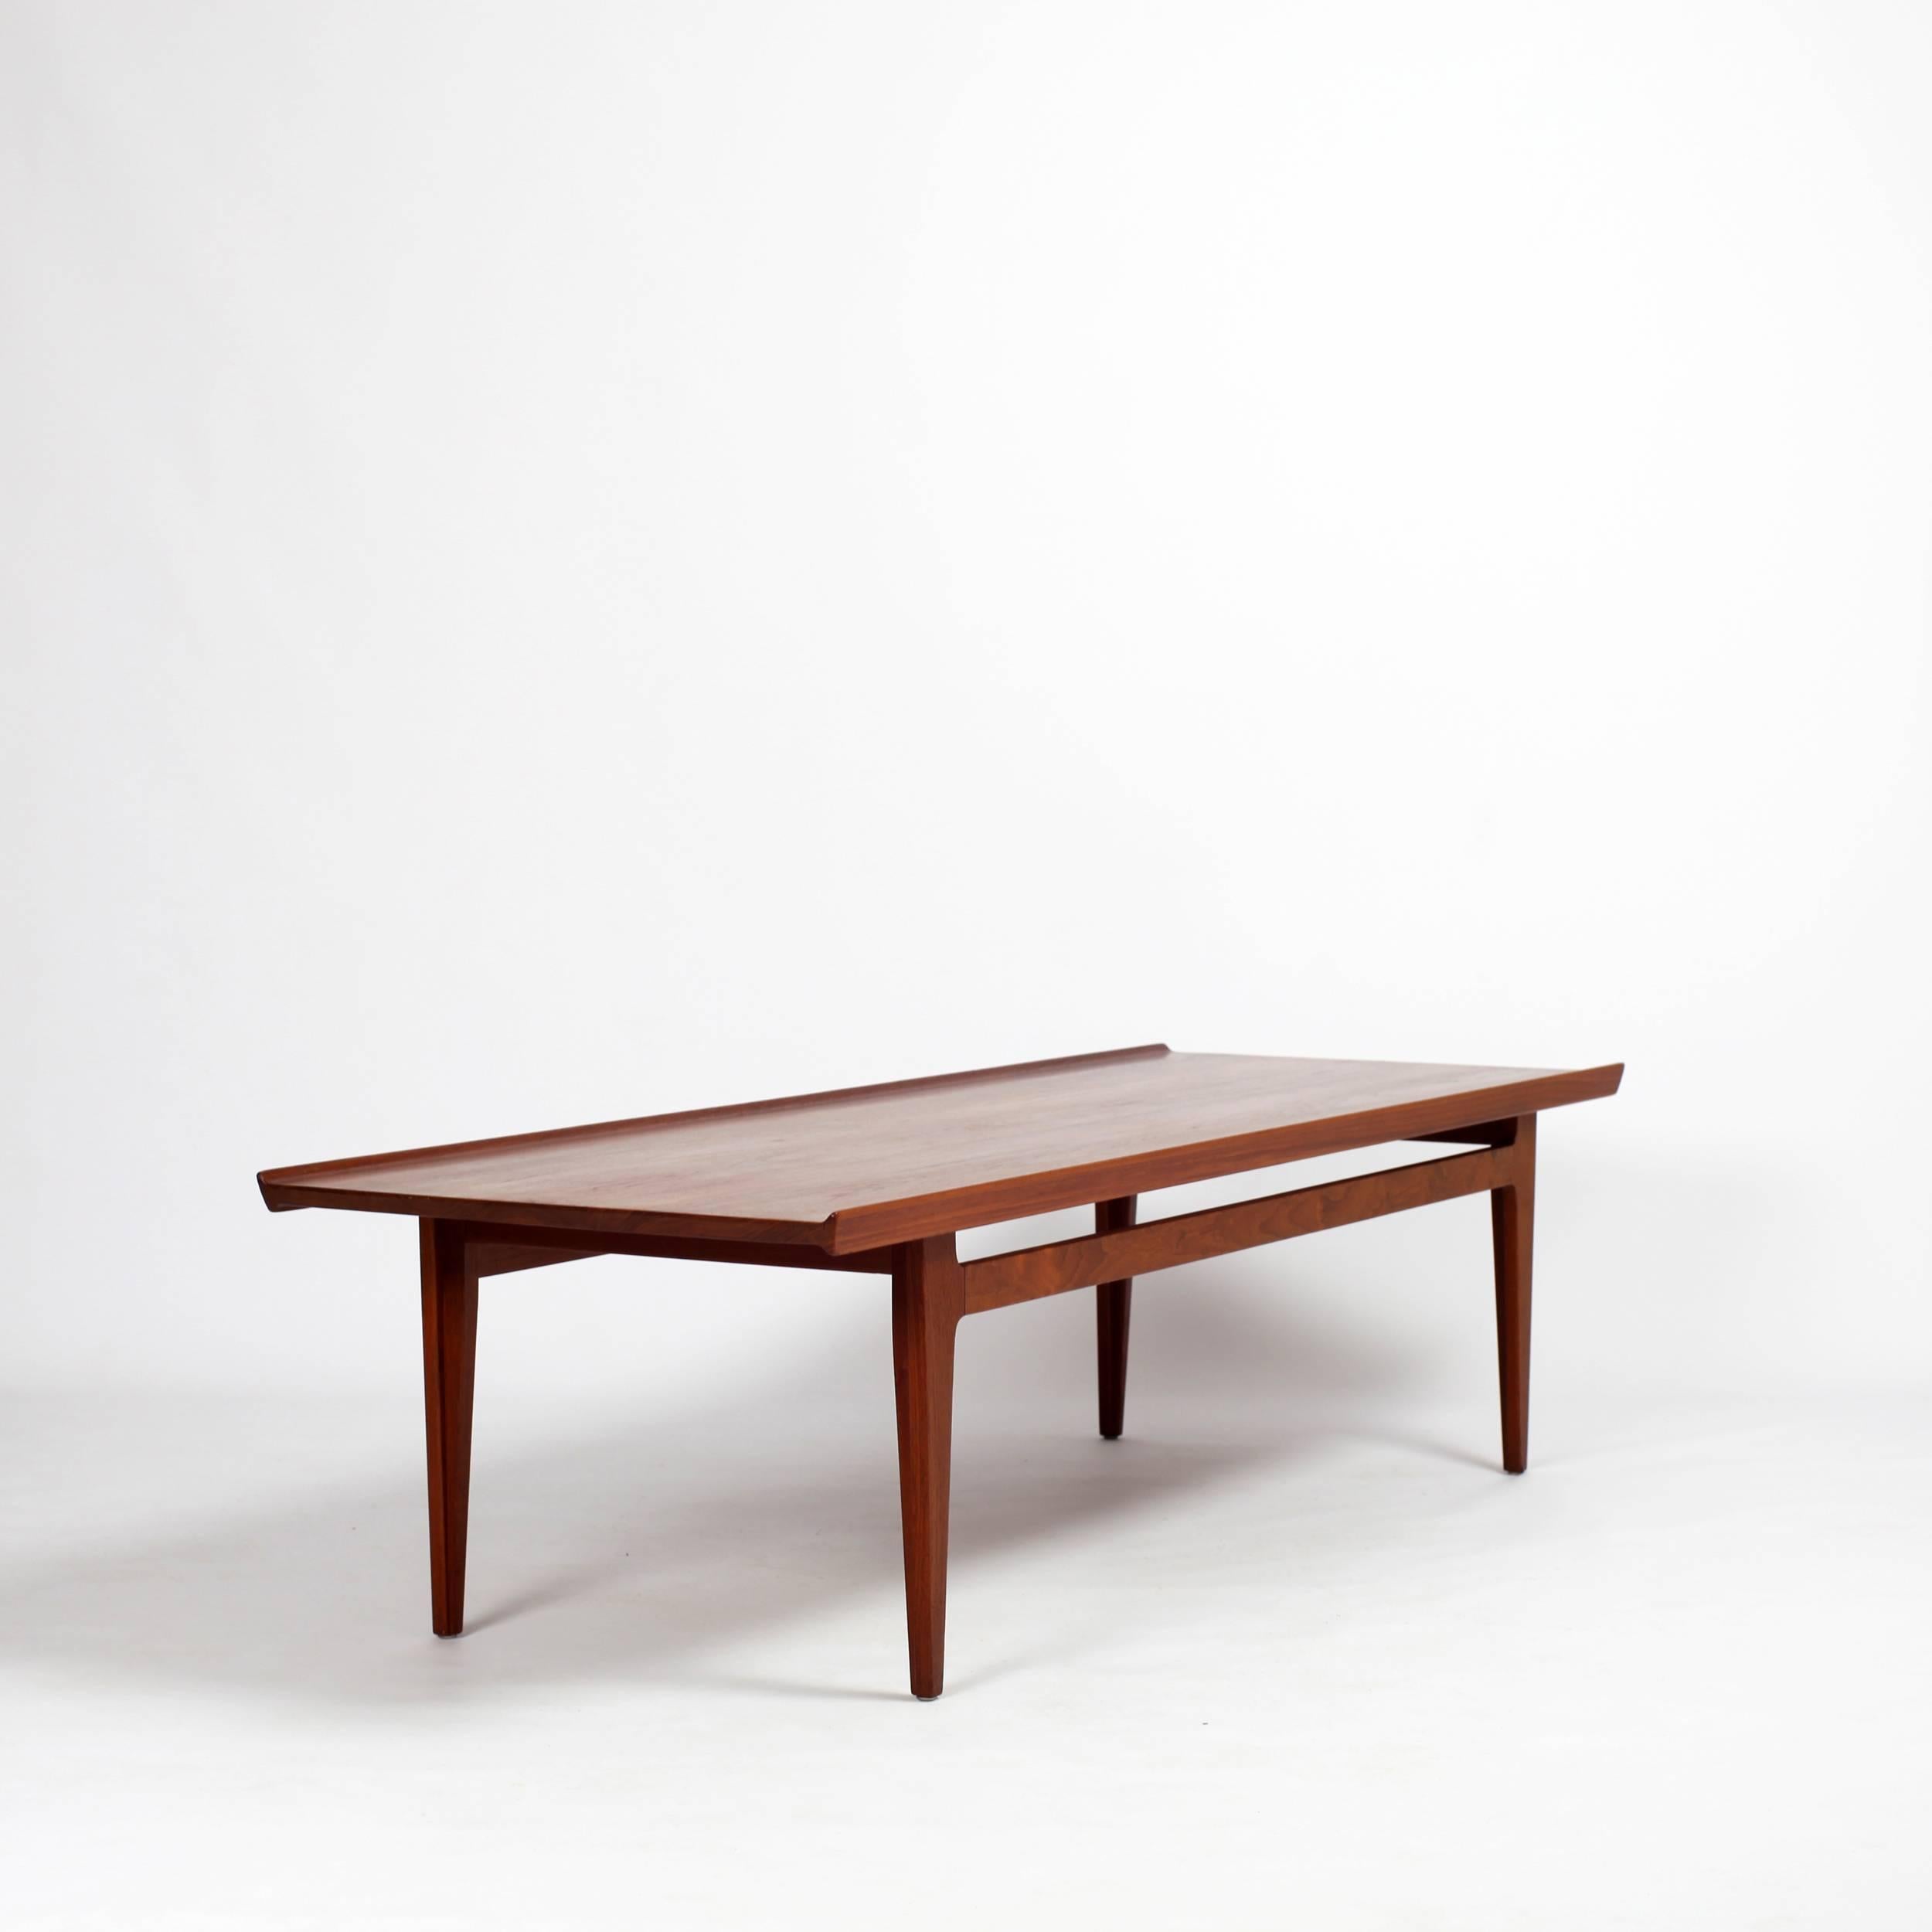 Very long teak coffee table mod 531 designed by Finn Juhl for France & Daverkosen Denmark from the 60s.
very elegant with his raised edges
Stamped France & Daverkosen and France & Son.
Nicely professional restore on a corner (last photo).
Reference: